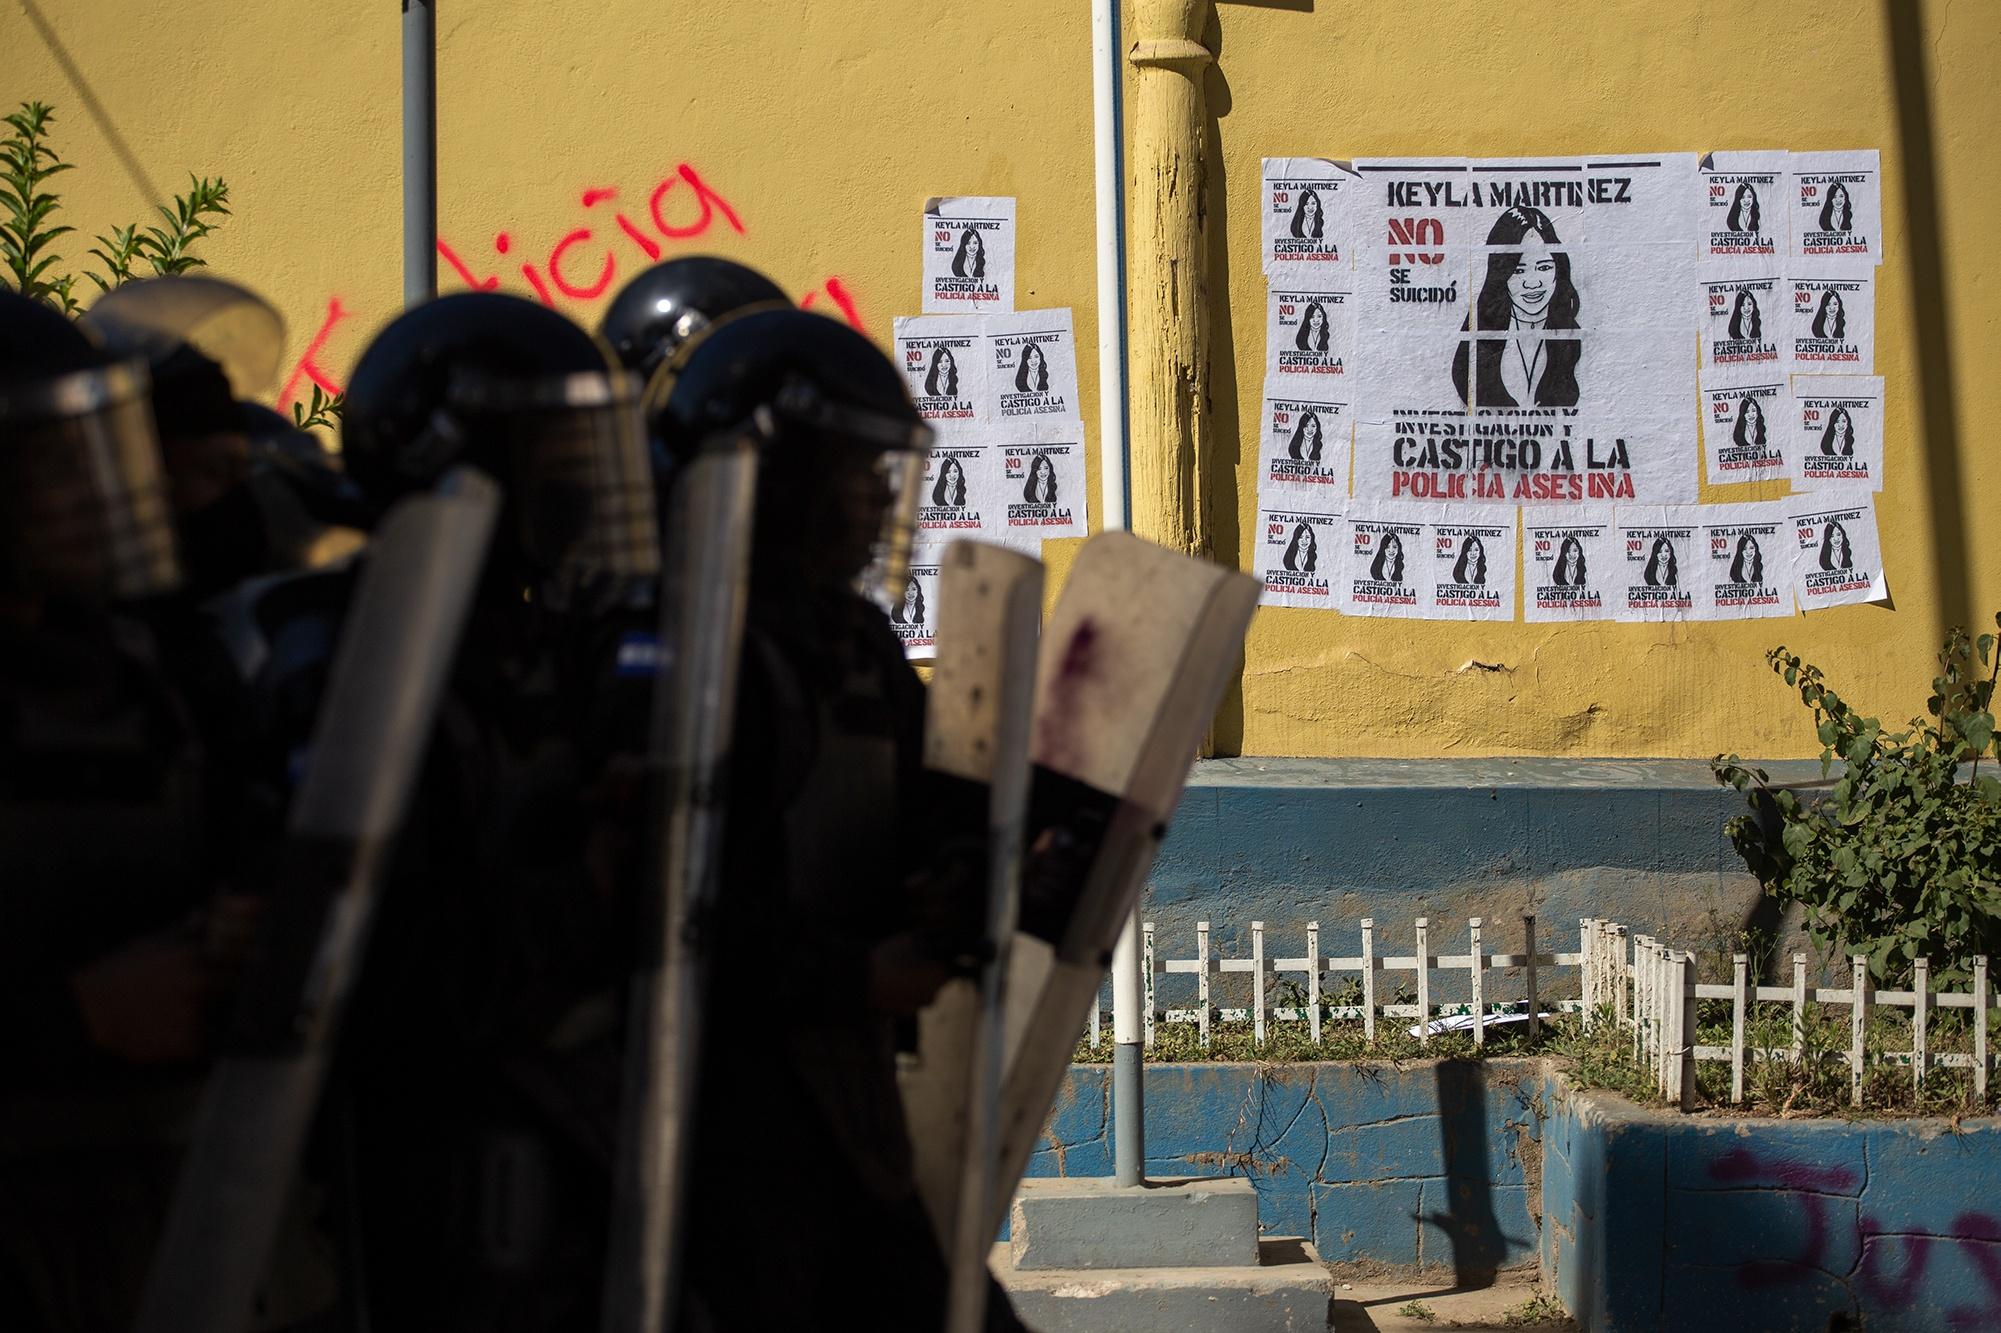 Posters of Keyla Martínez’s face glued to the walls of the police station in Intibucá following the news of her death. La Esperanza, Intibucá, February 8, 2021. Photo: Martín Cálix/Contracorriente